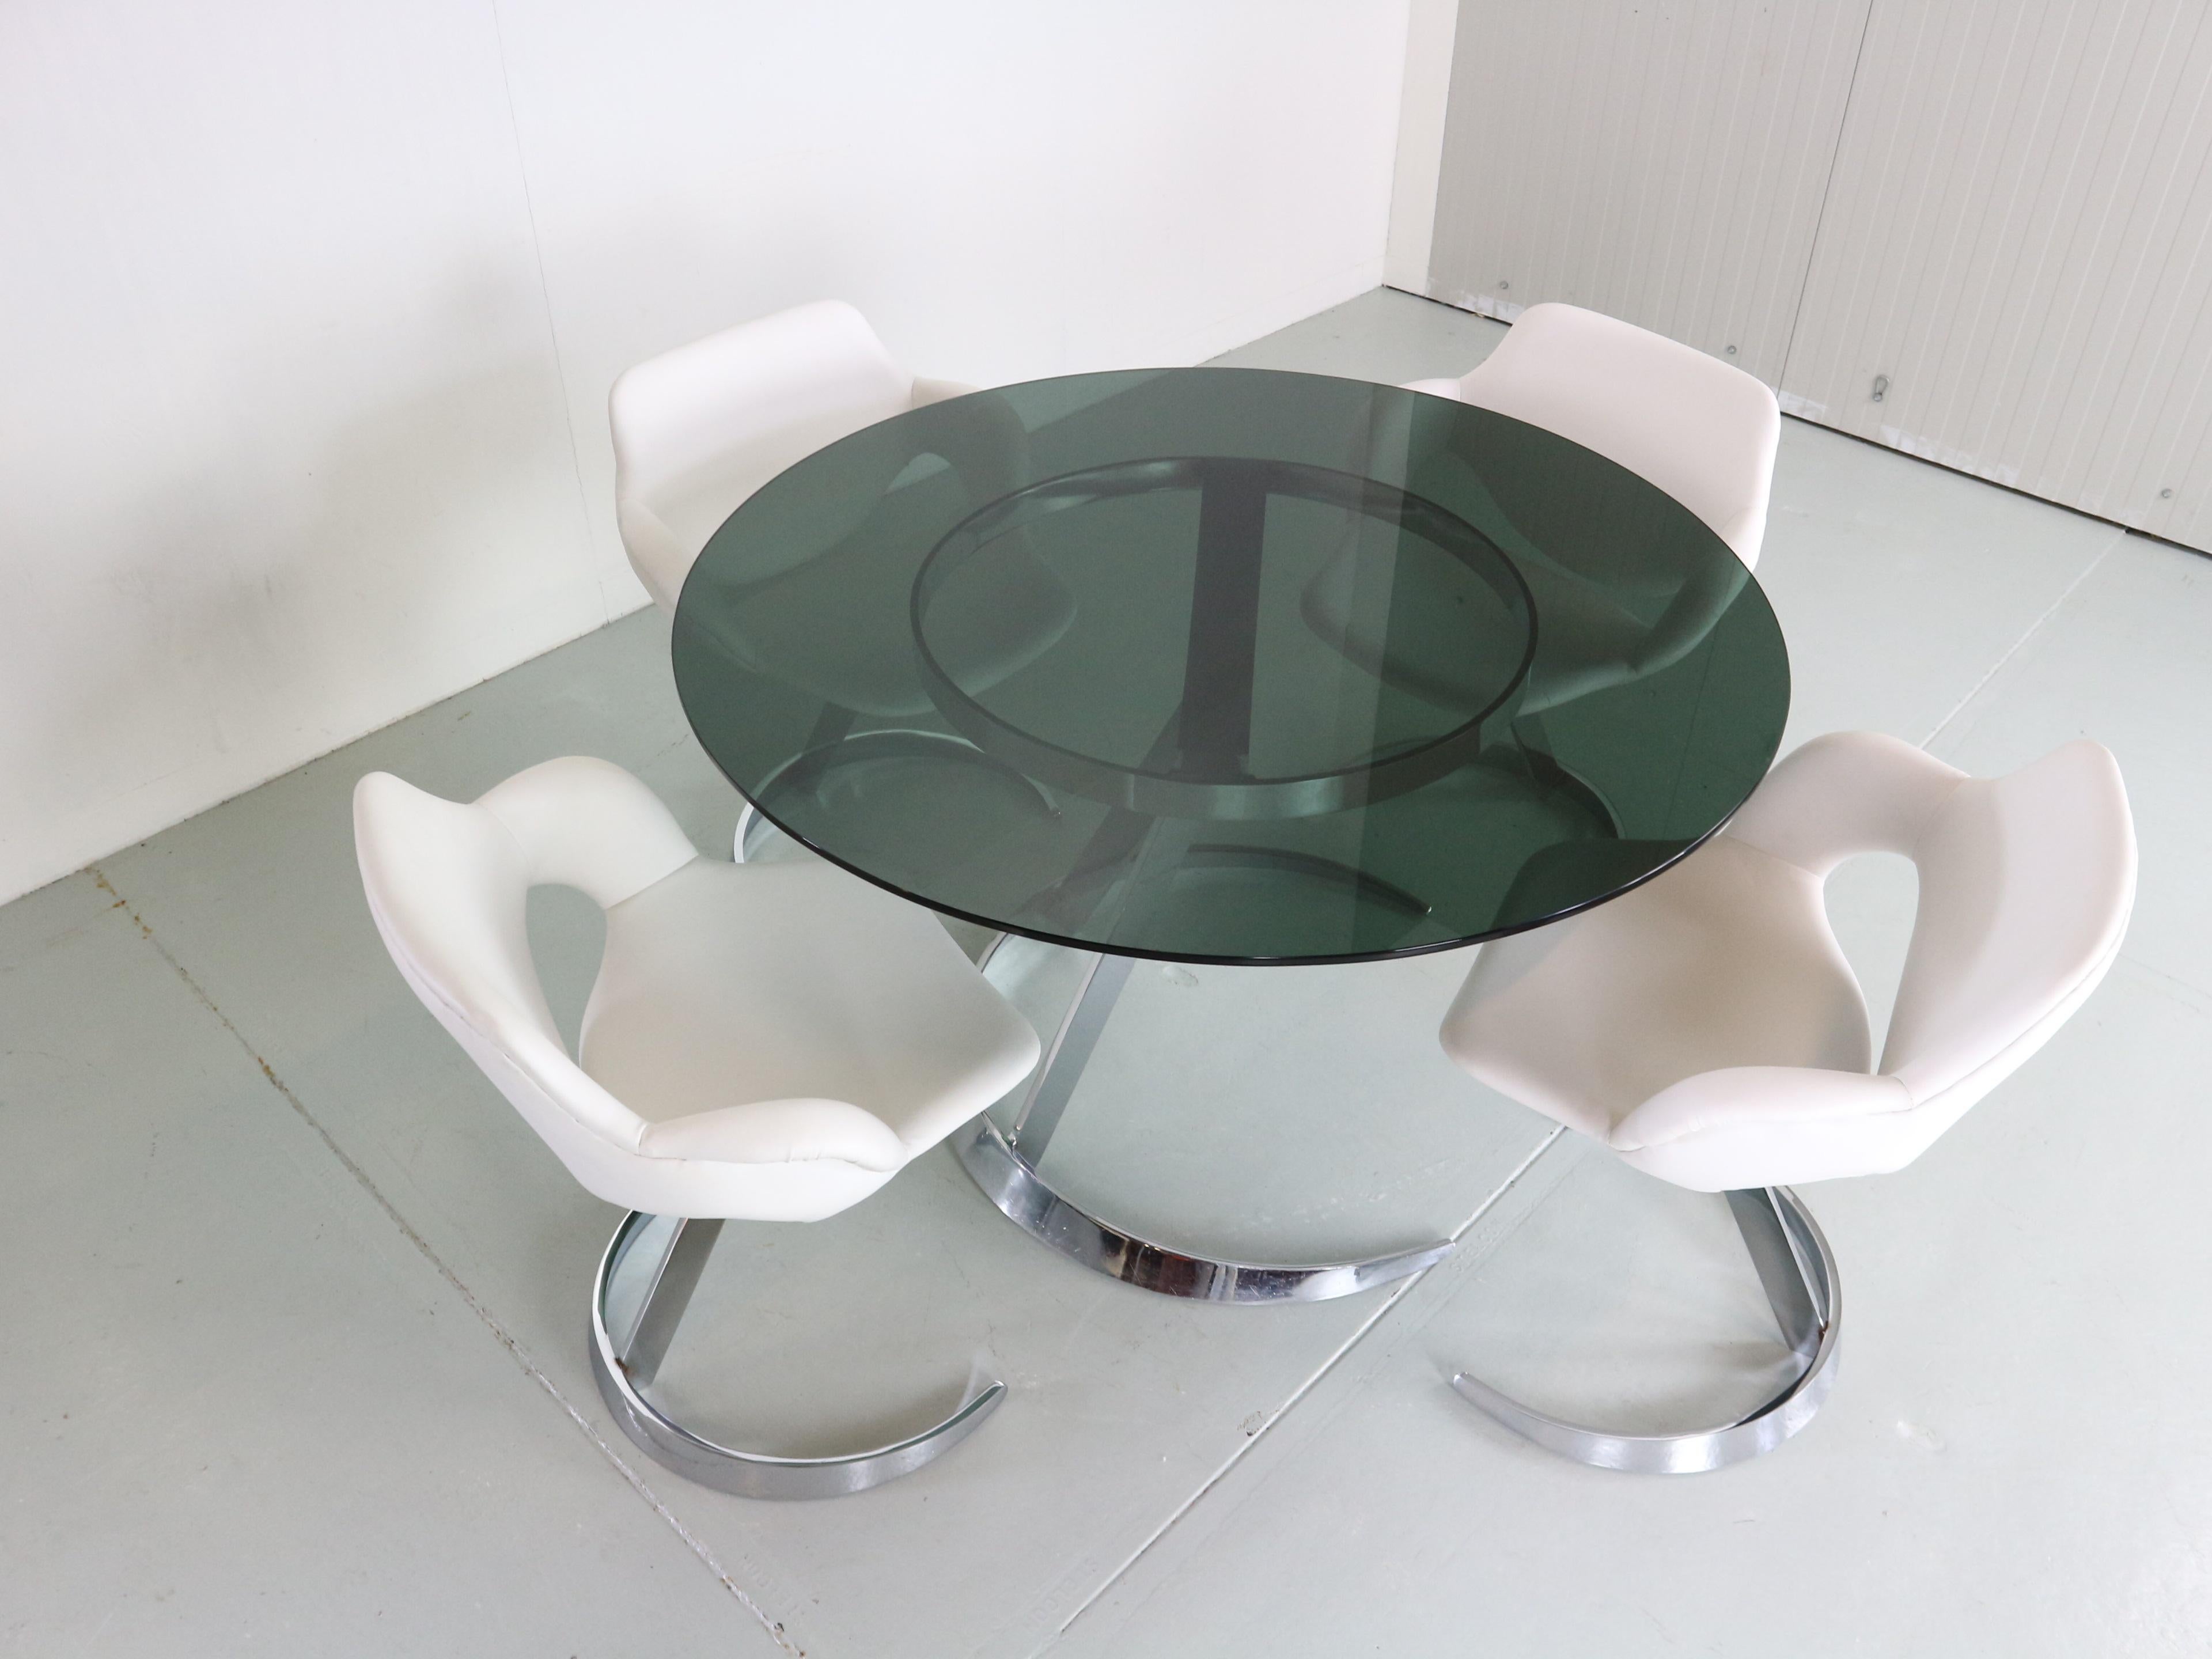 Space Age period dining room set designed by Boris Tabacoff and manufactured for Mobilier Modulair Moderne in 1970s circa period, France.

The set consists of the round dinning table and 4 matching chairs.
Round table is standing on a solid chrome